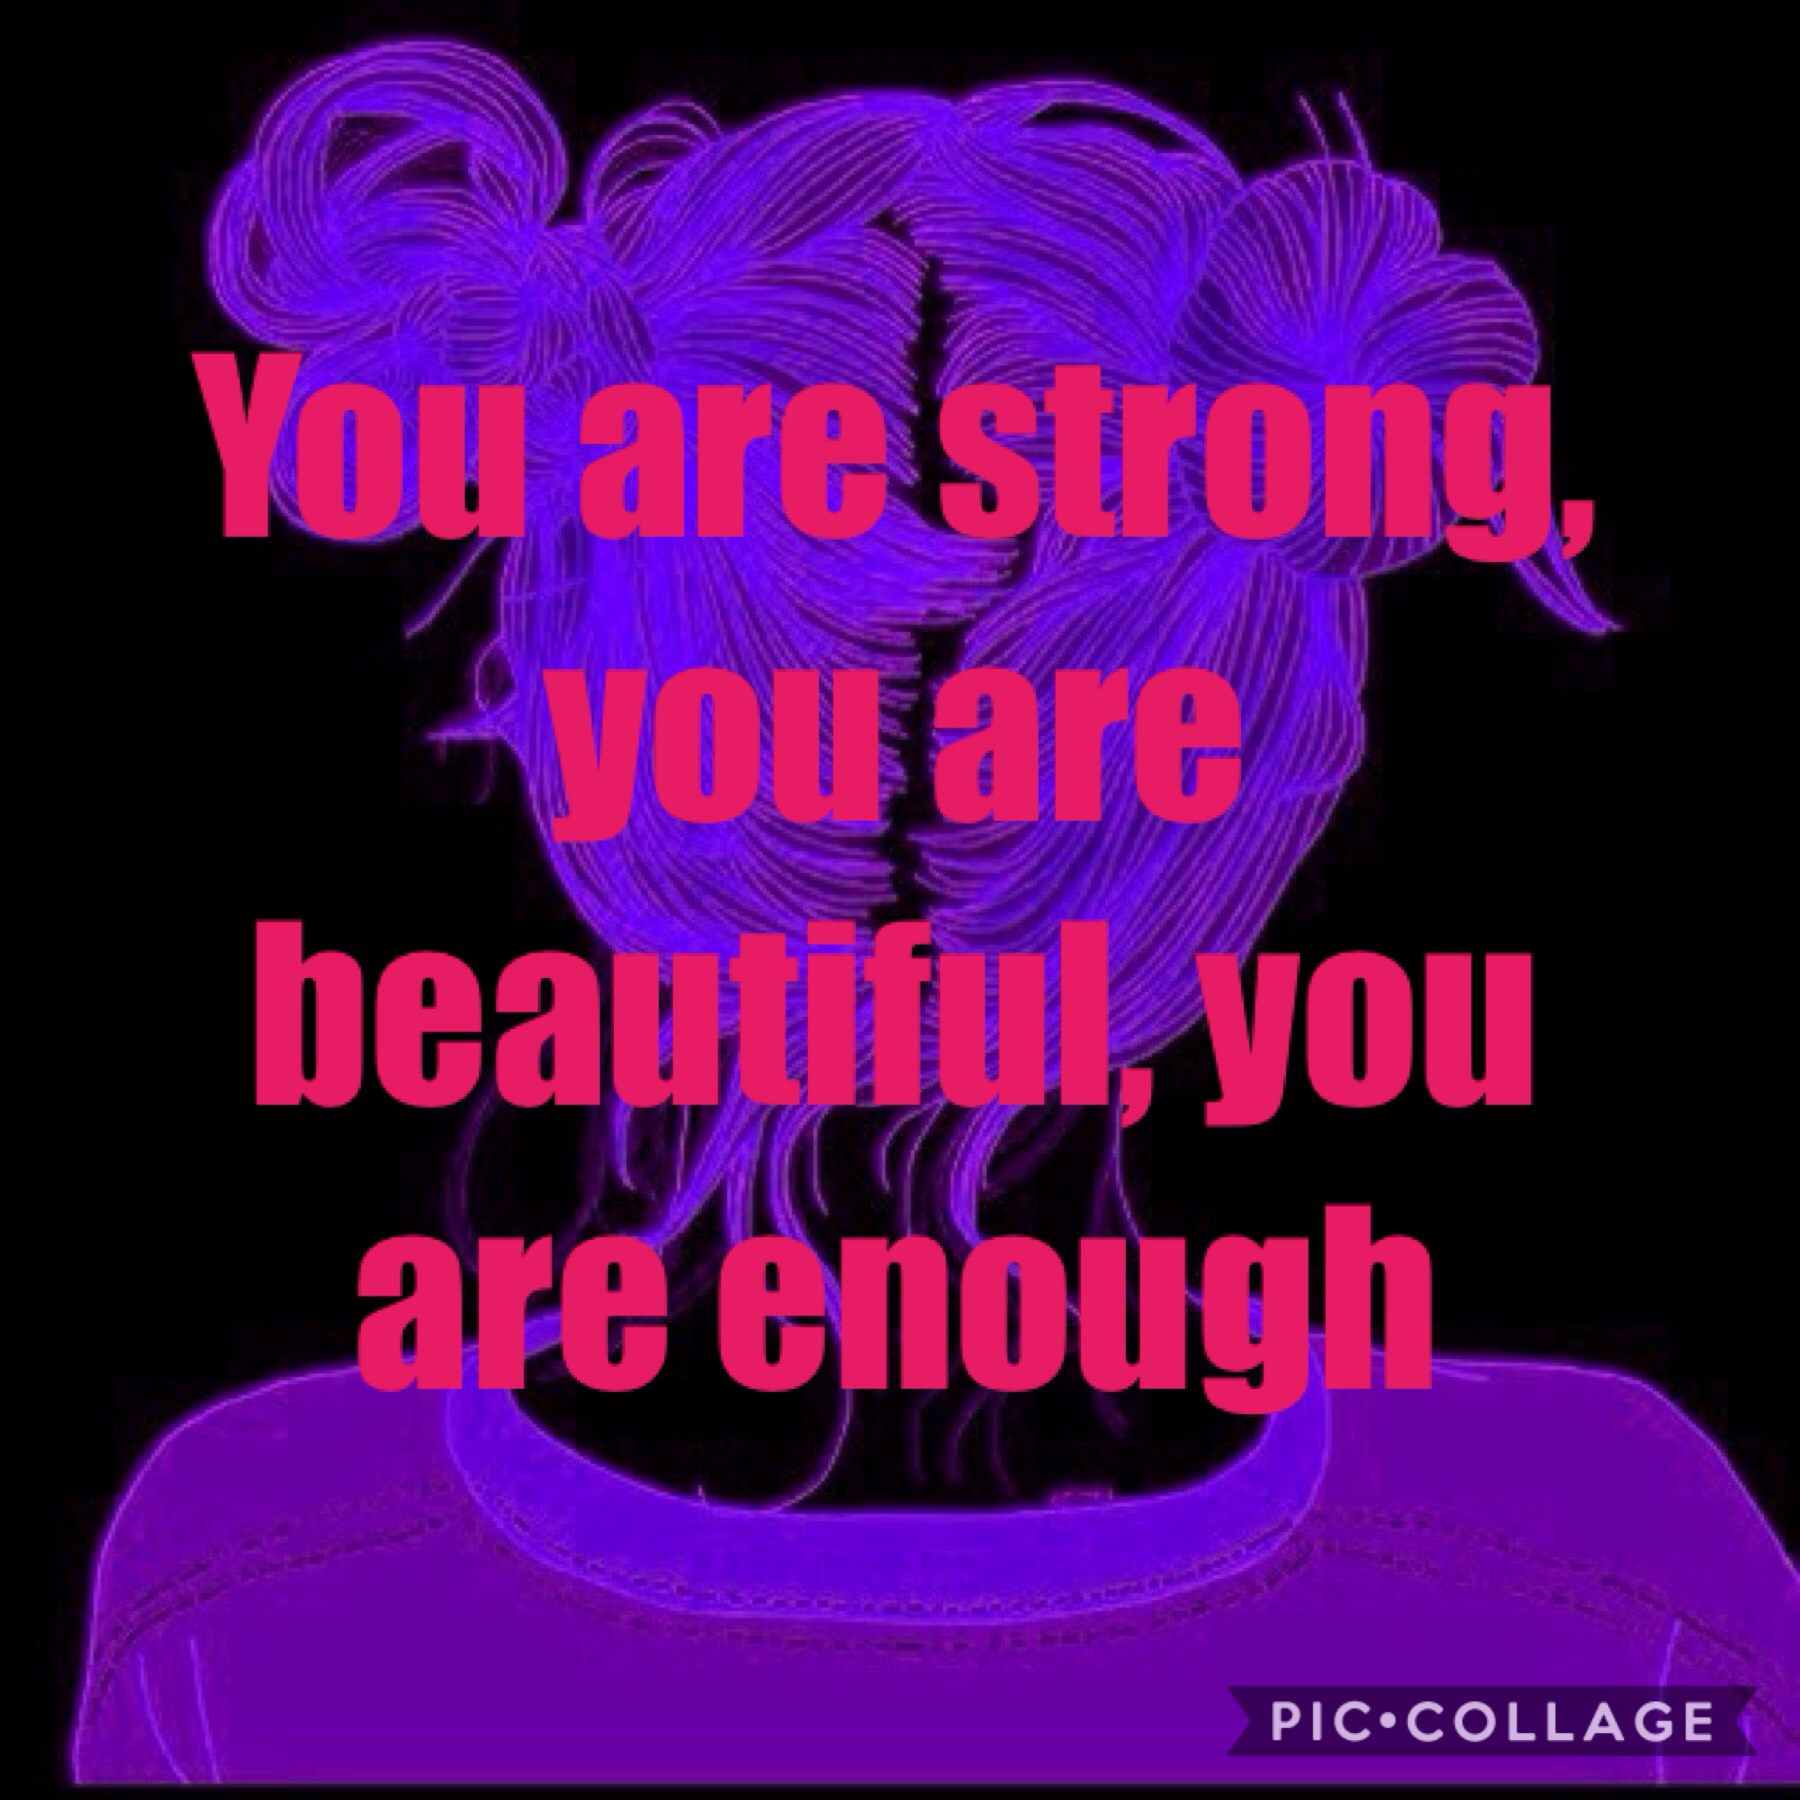 You are strong, you are beautiful, you are enough!❤️